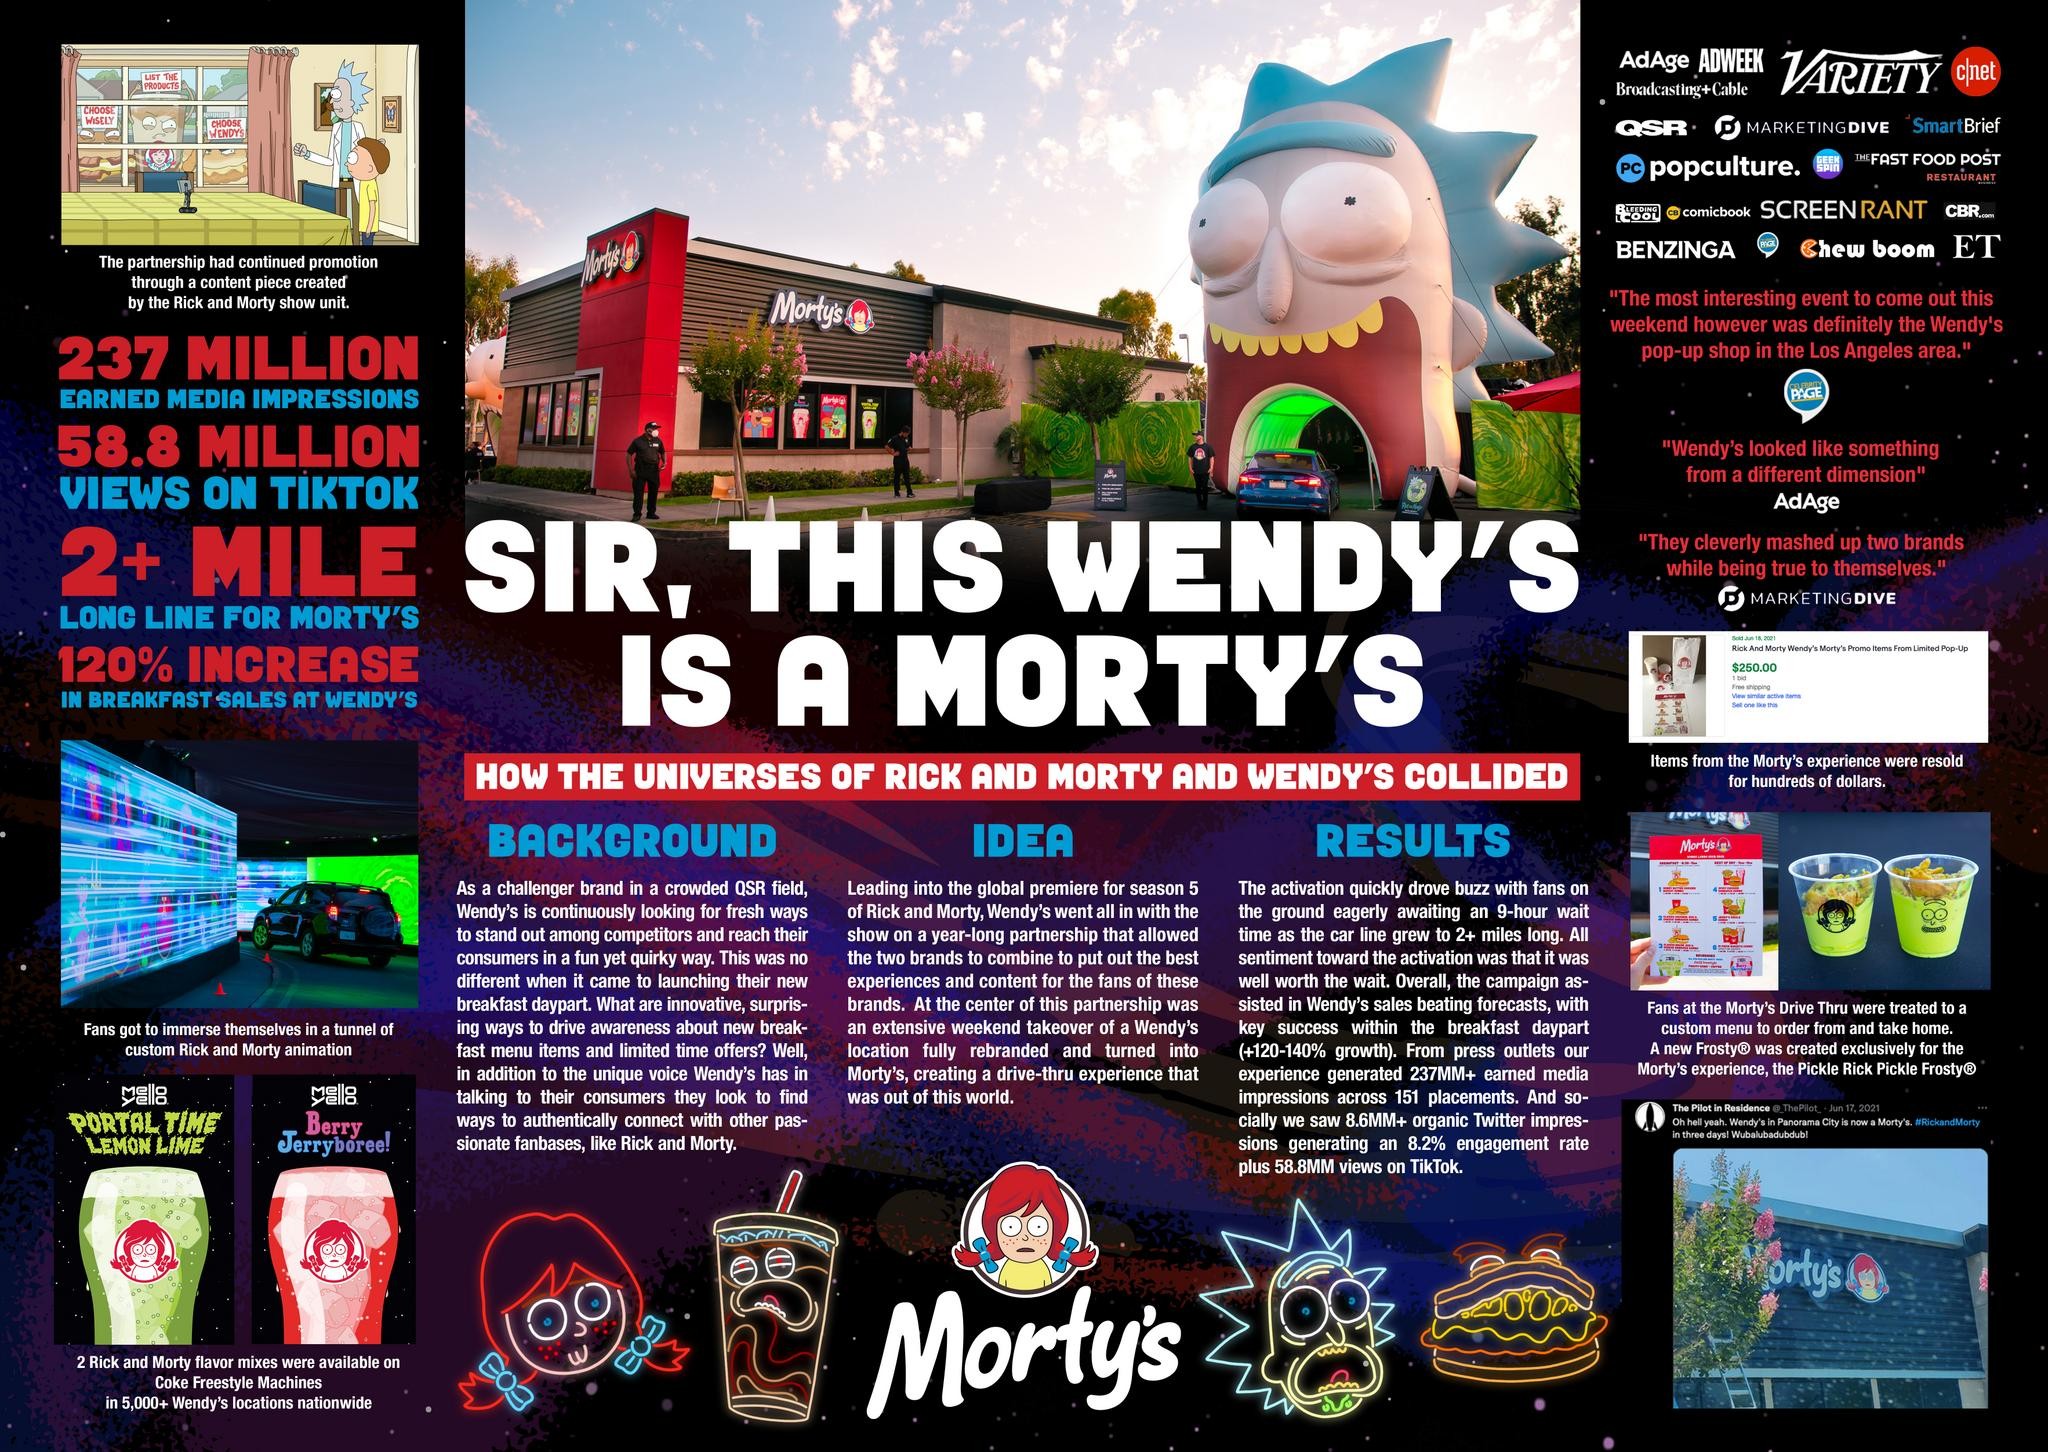 Sir, This Wendy's is a Morty’s!